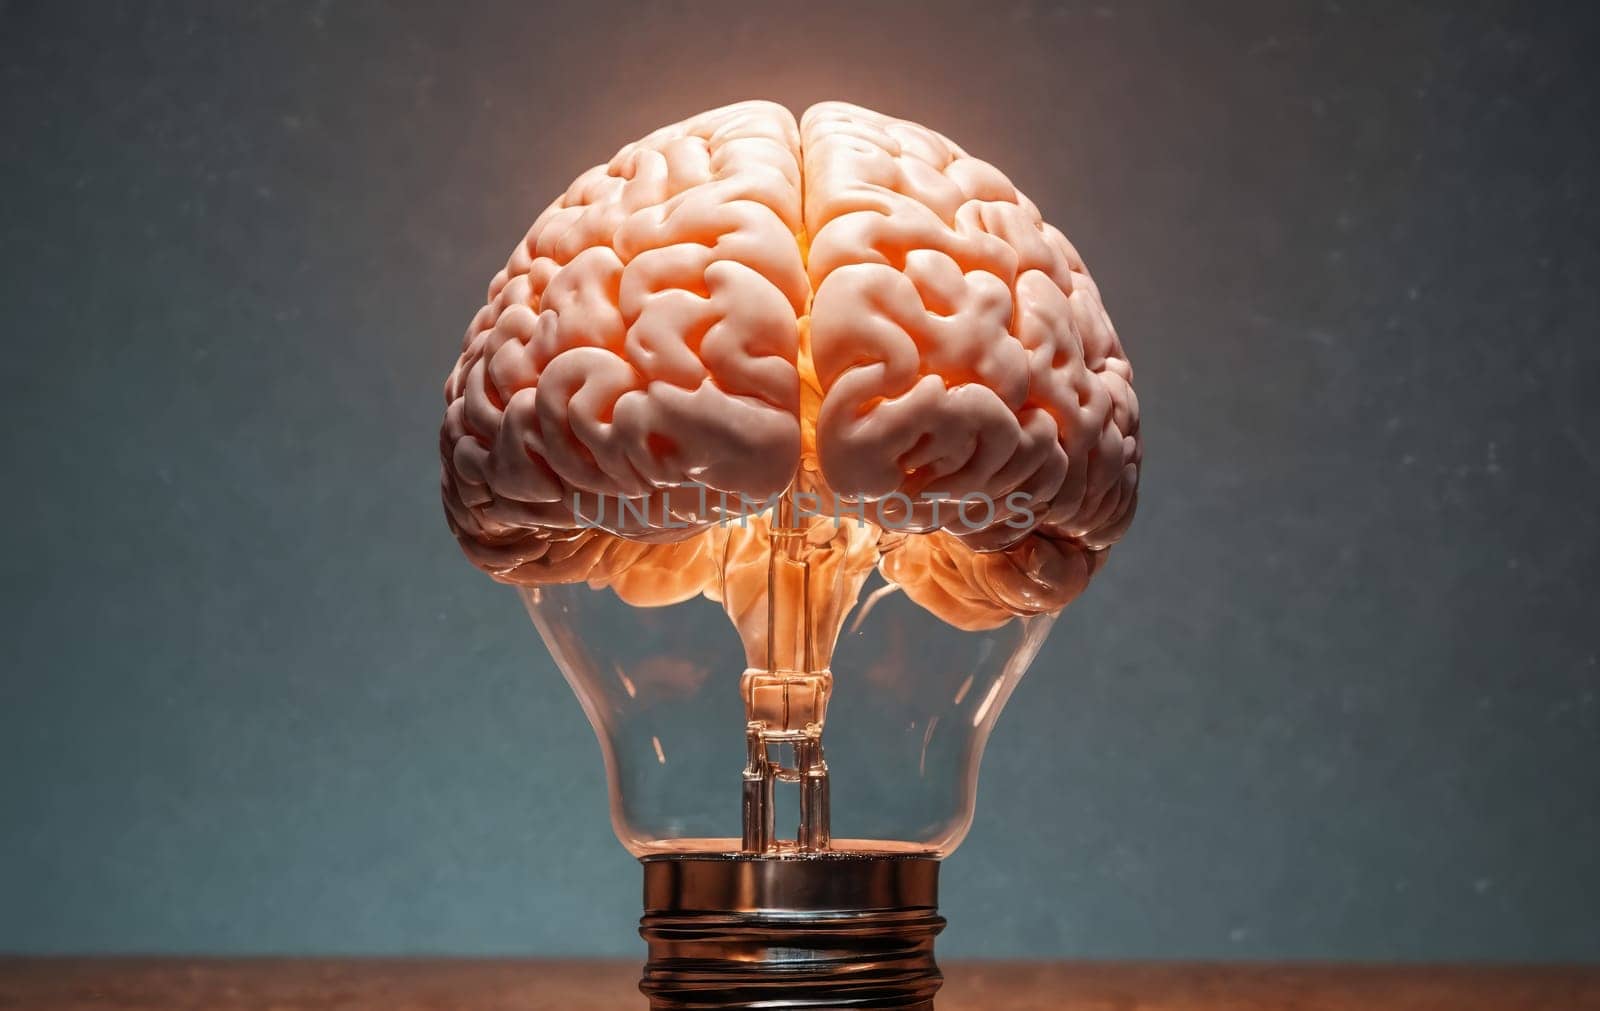 Human brain in a light bulb on a dark background. Brainstorming concept.